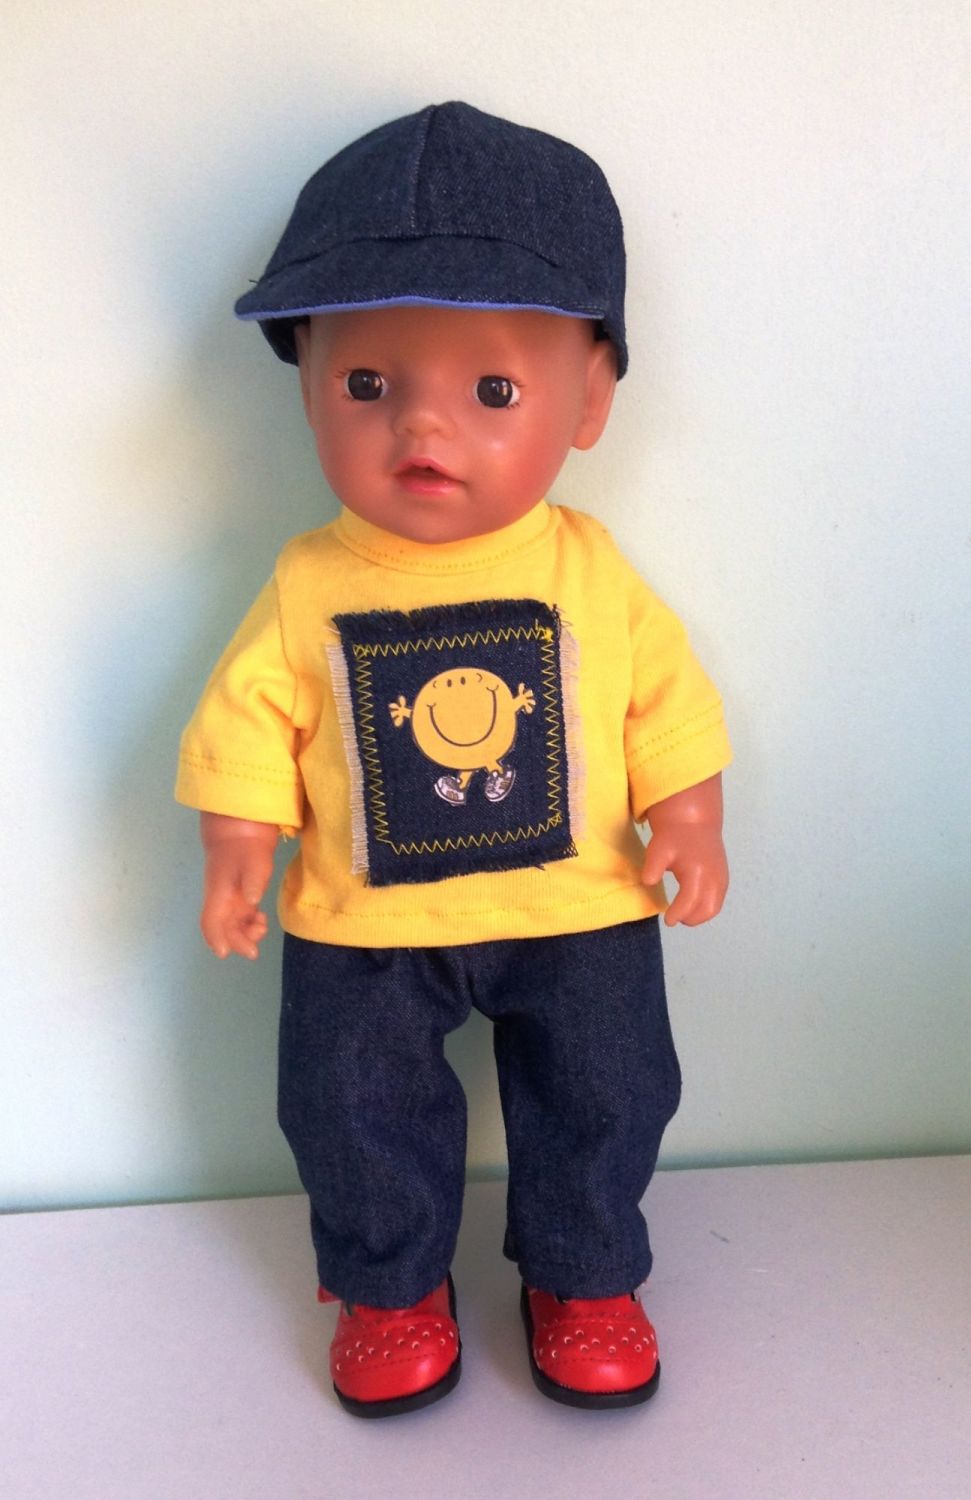 Doll's jeans set made to fit a 12 inch high baby boy doll